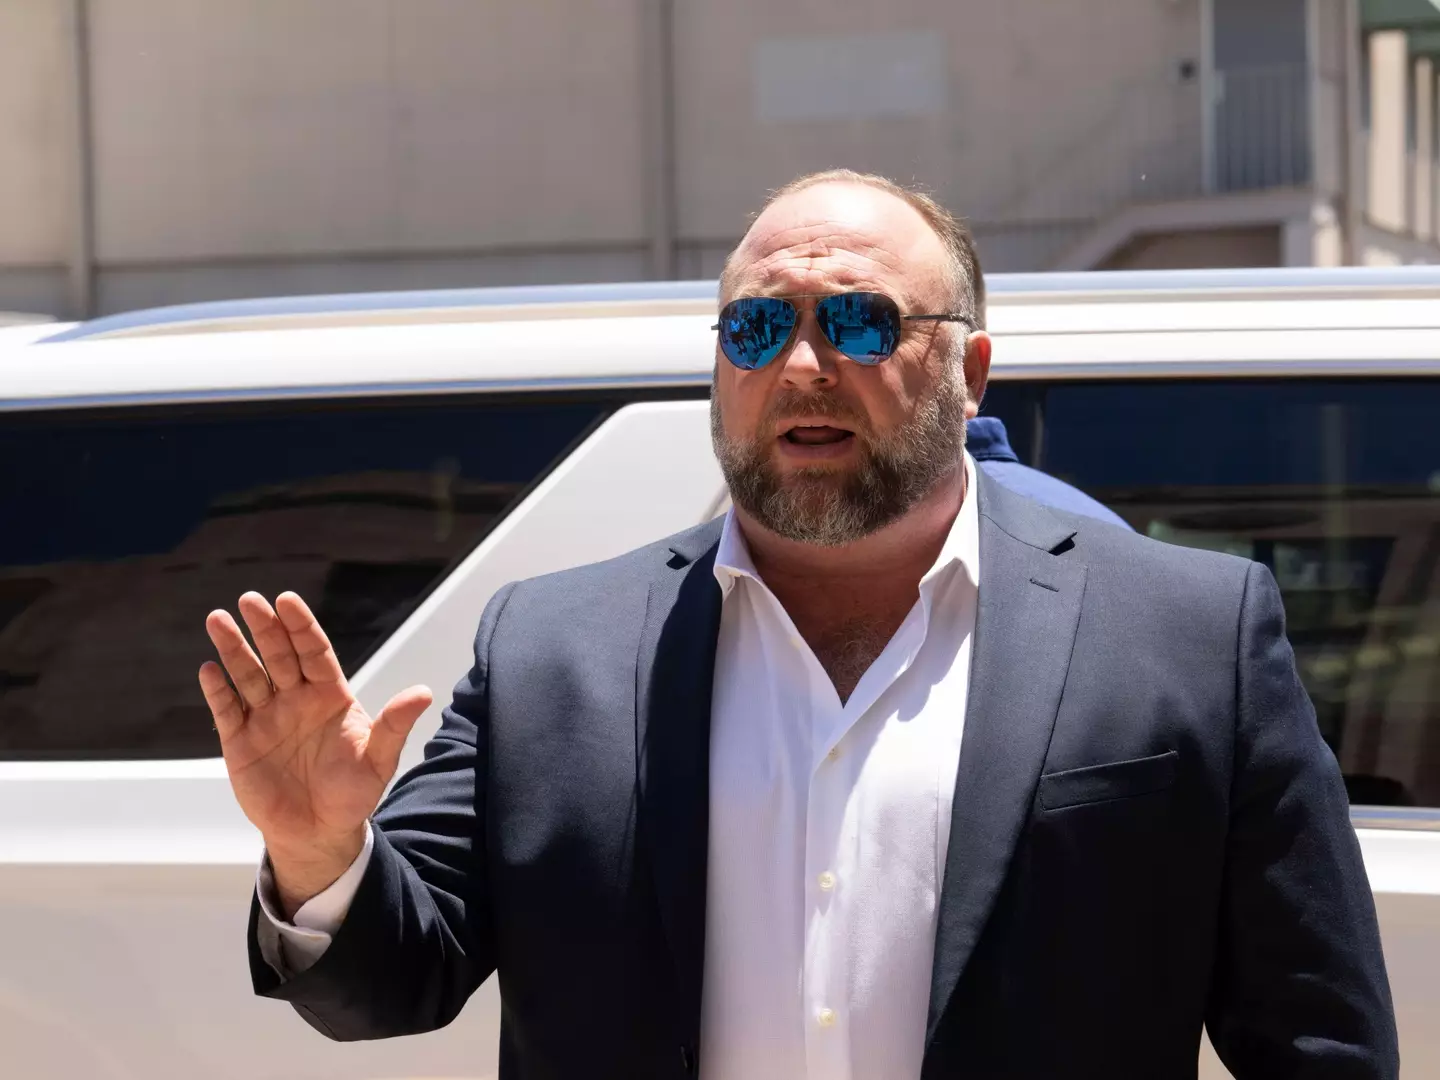 The parents of two victims have taken the Infowars radio host to court after he falsely claimed that the school shooting was a hoax.